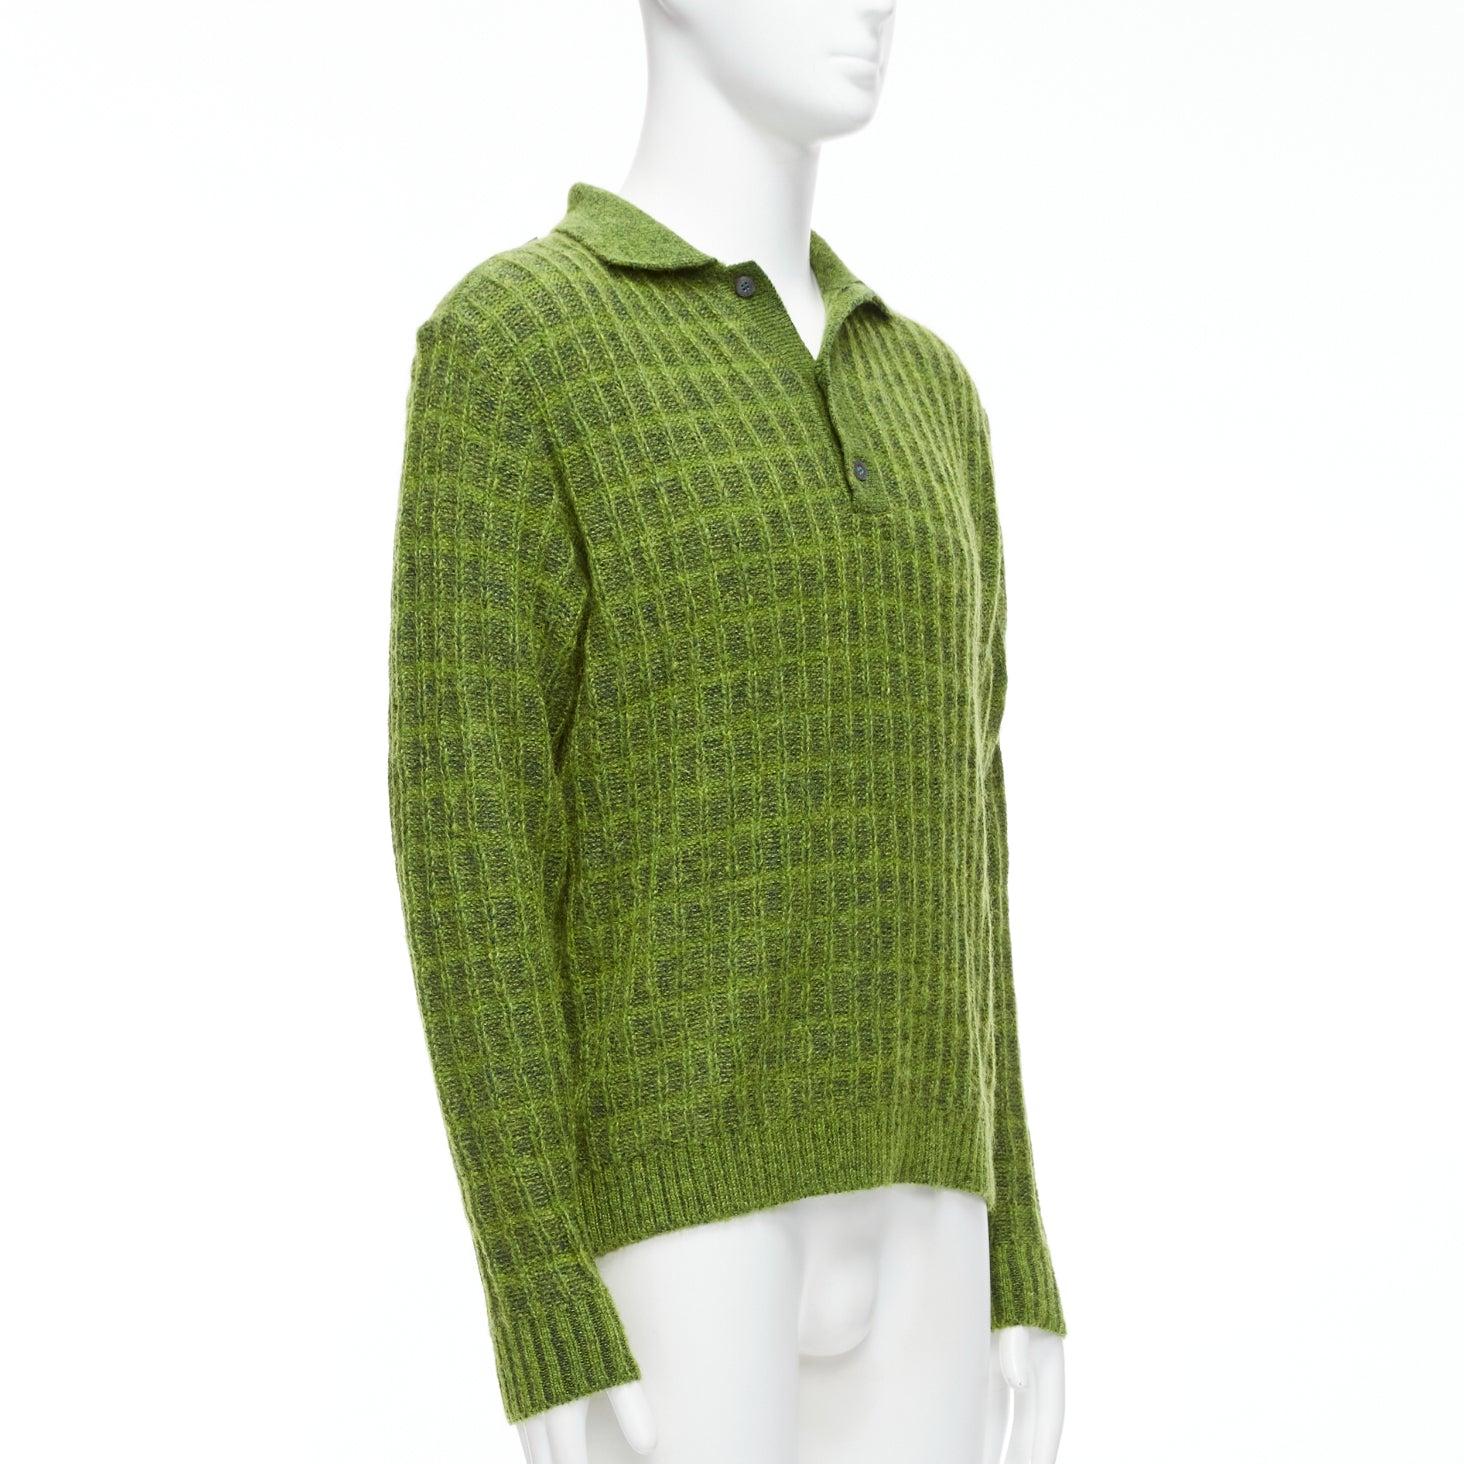 GUCCI Vintage green mohair blend waffle knit buttons polo sweater M
Reference: JSLE/A00116
Brand: Gucci
Material: Mohair, Blend
Color: Green
Pattern: Solid
Closure: Button
Extra Details: Button details at shoulder.
Made in: